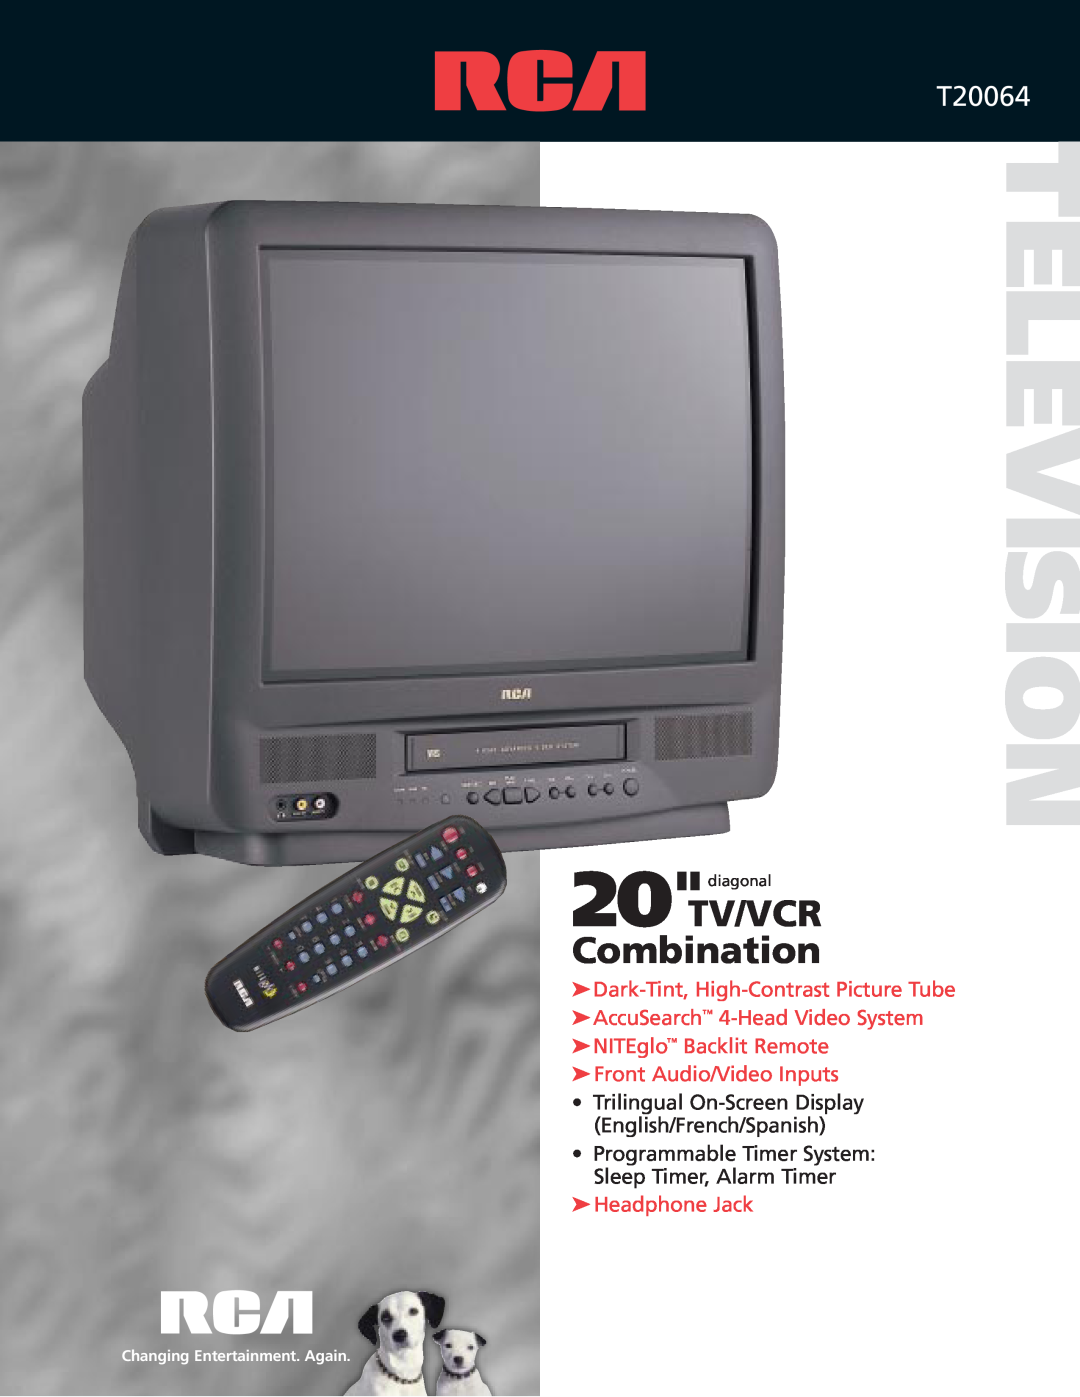 RCA T20064 manual Television, Combination, Dark-Tint, High-Contrast Picture Tube AccuSearch 4-Head Video System 